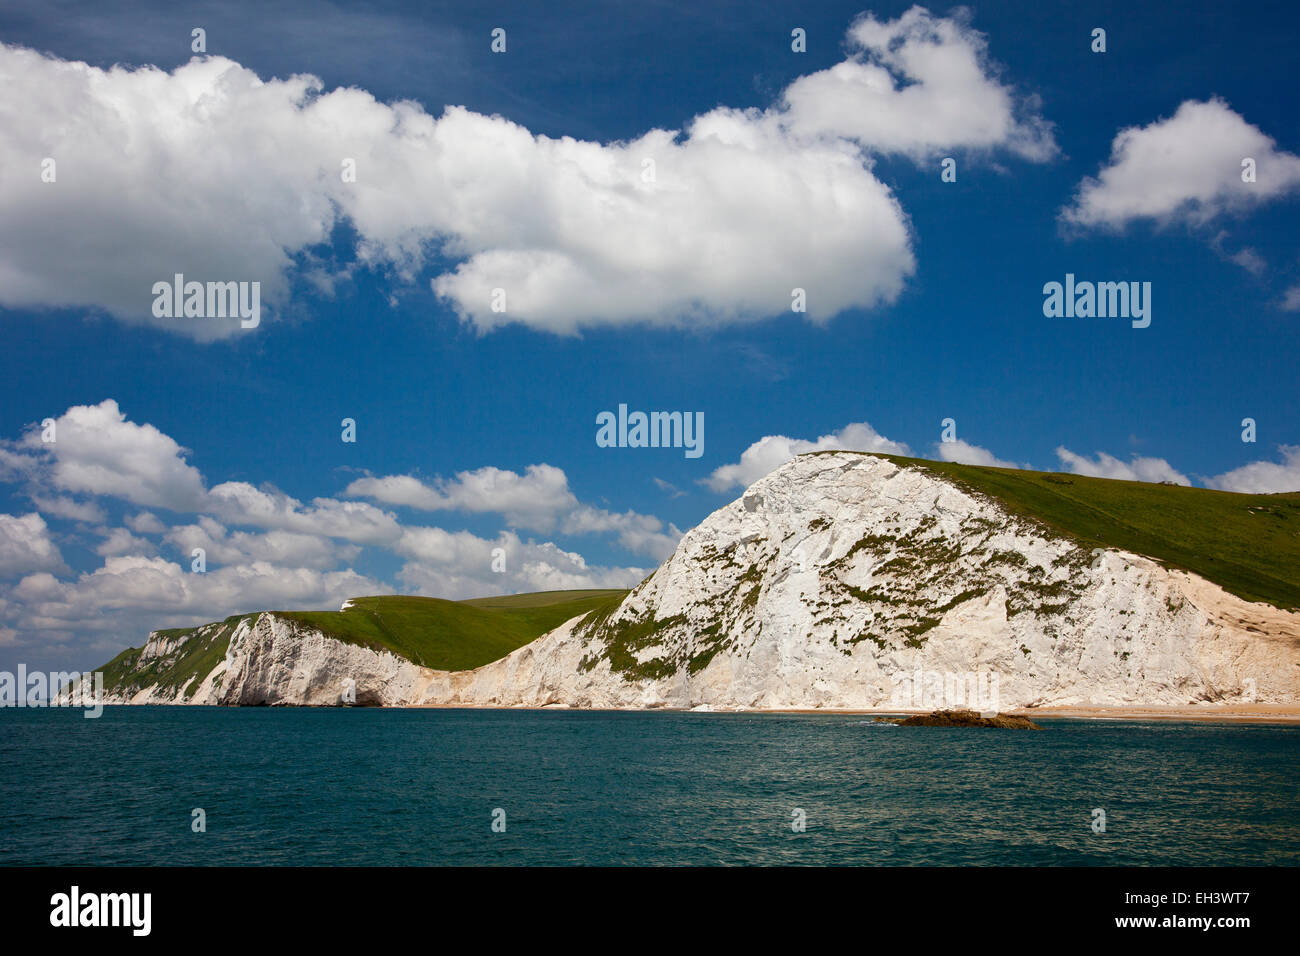 The chalk cliffs of Swyre Head (right) and Bat Head (left) on the Jurassic Coast, Dorset, England, UK Stock Photo